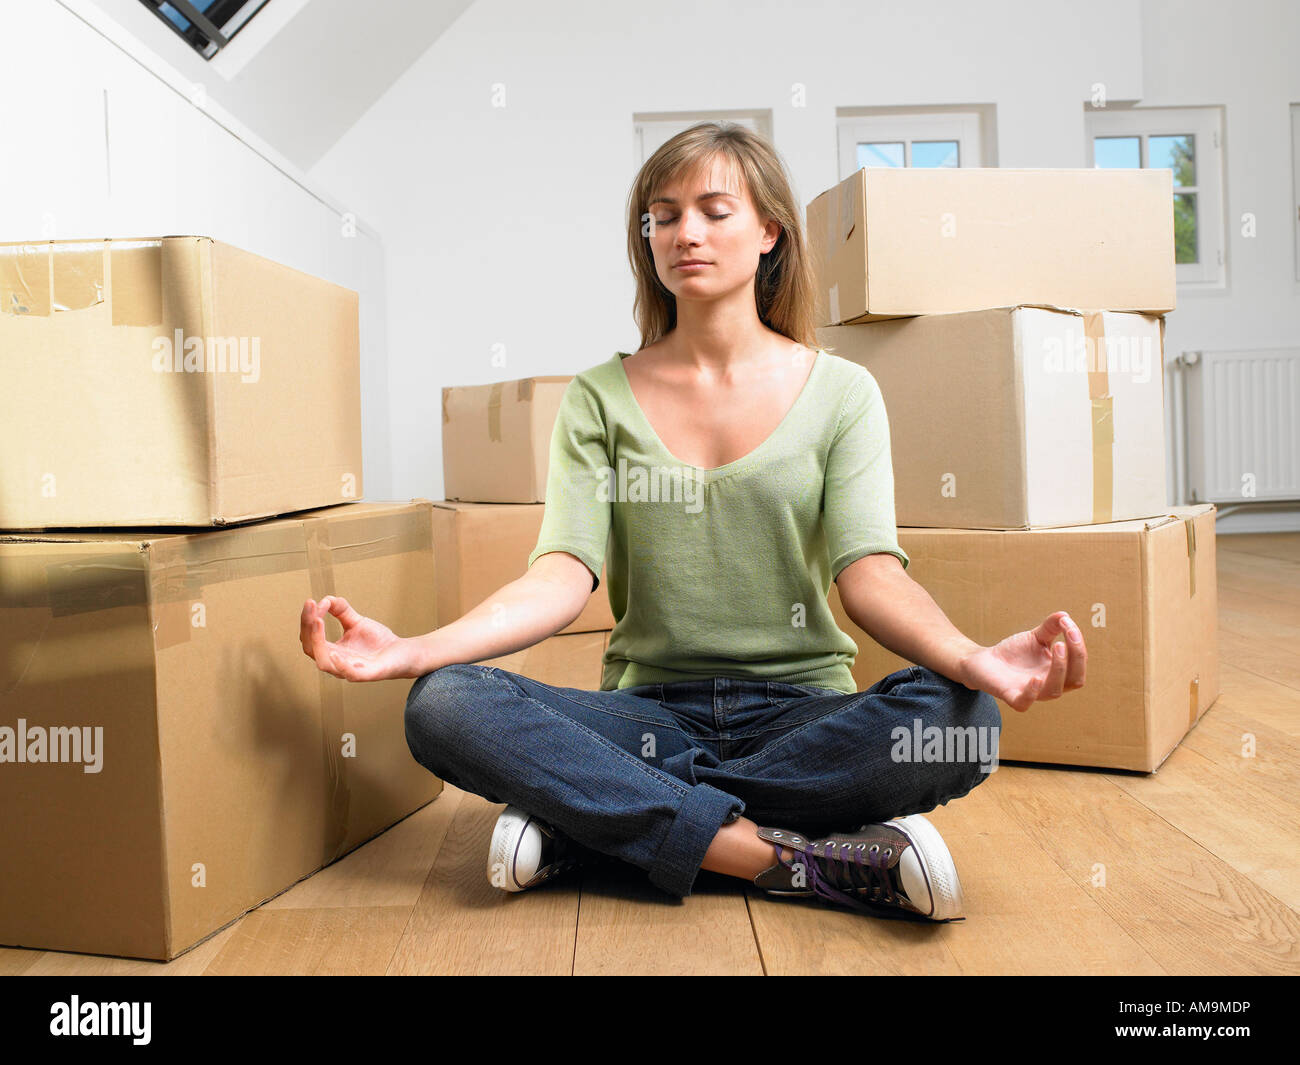 Woman doing yoga with moving boxes around her. Stock Photo